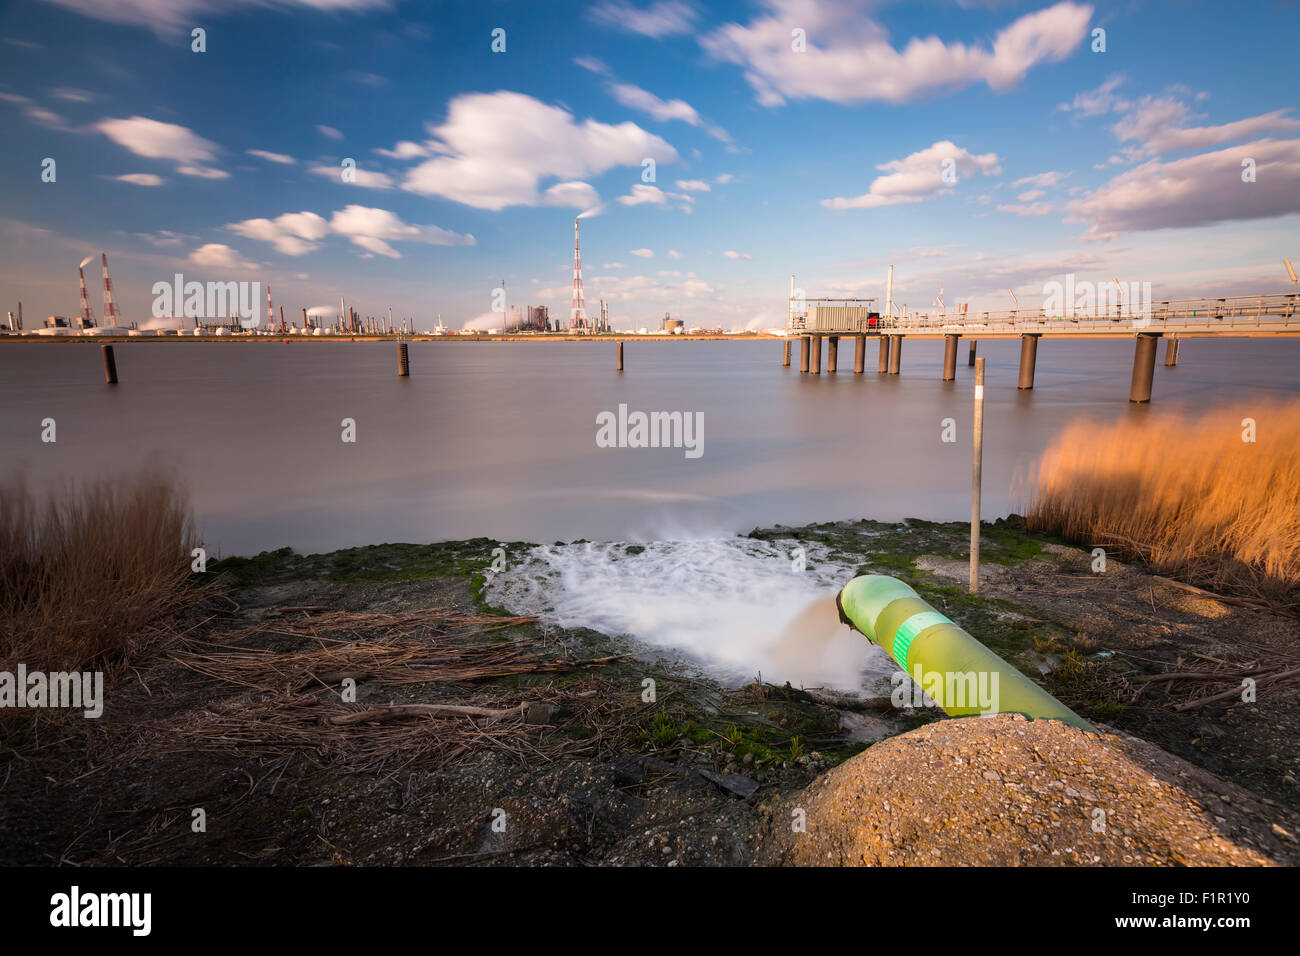 Long exposure shot of a wastewater pipe and a large oil refinery in the harbor of Antwerp, Belgium with blue sky and warm evenin Stock Photo